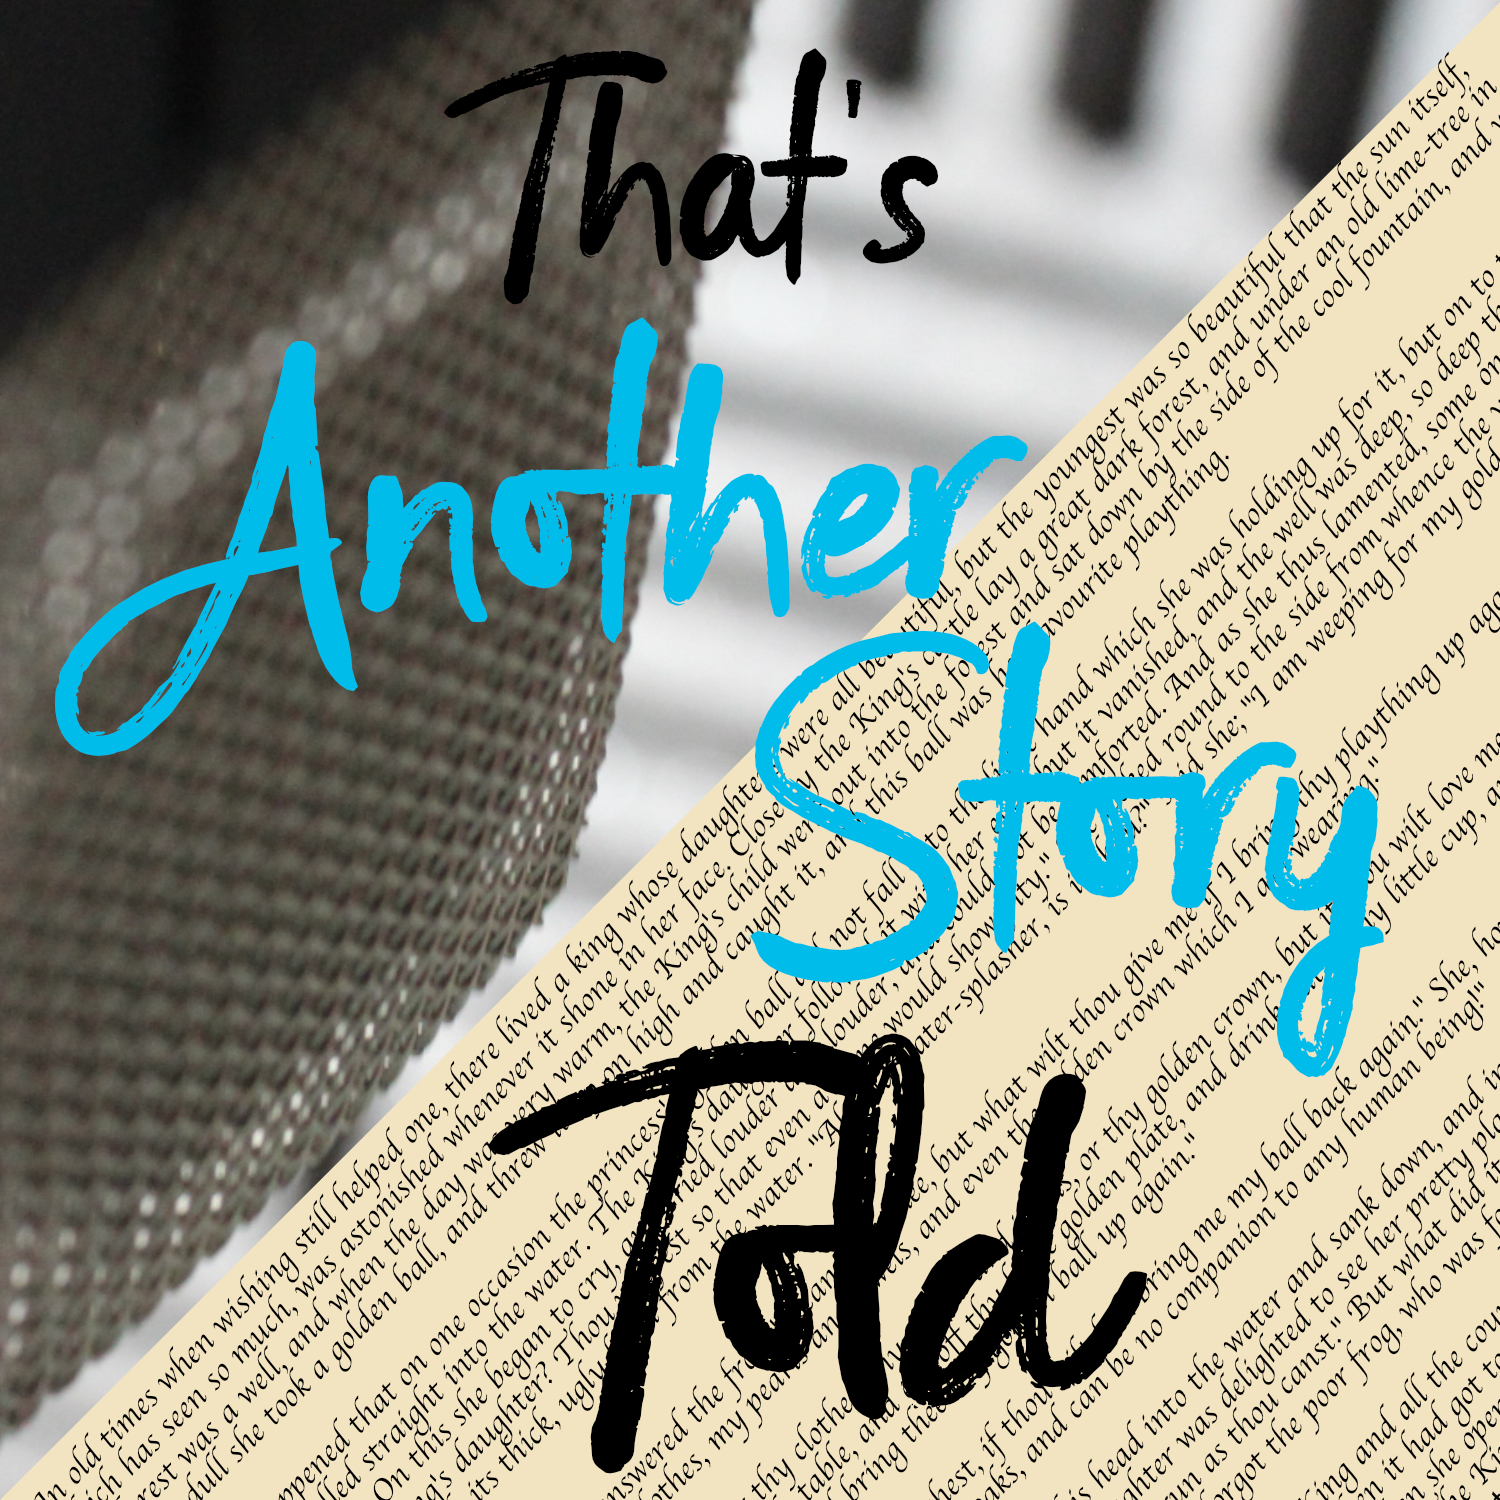 Show artwork for That's Another Story Told